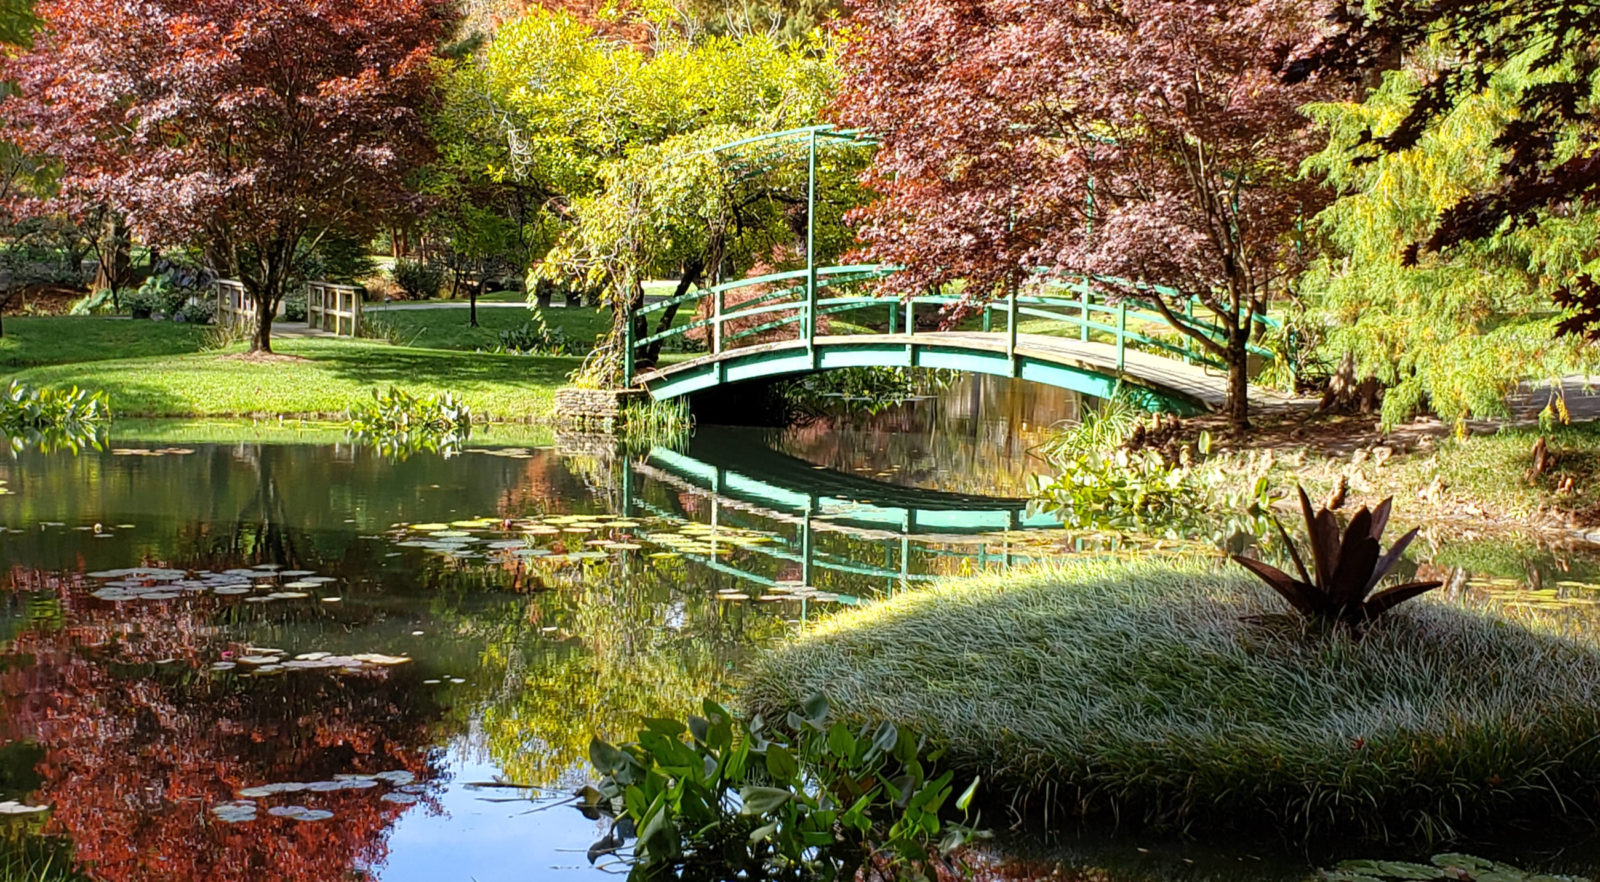 Replica of the bridge over lilly pond from Monet's painting